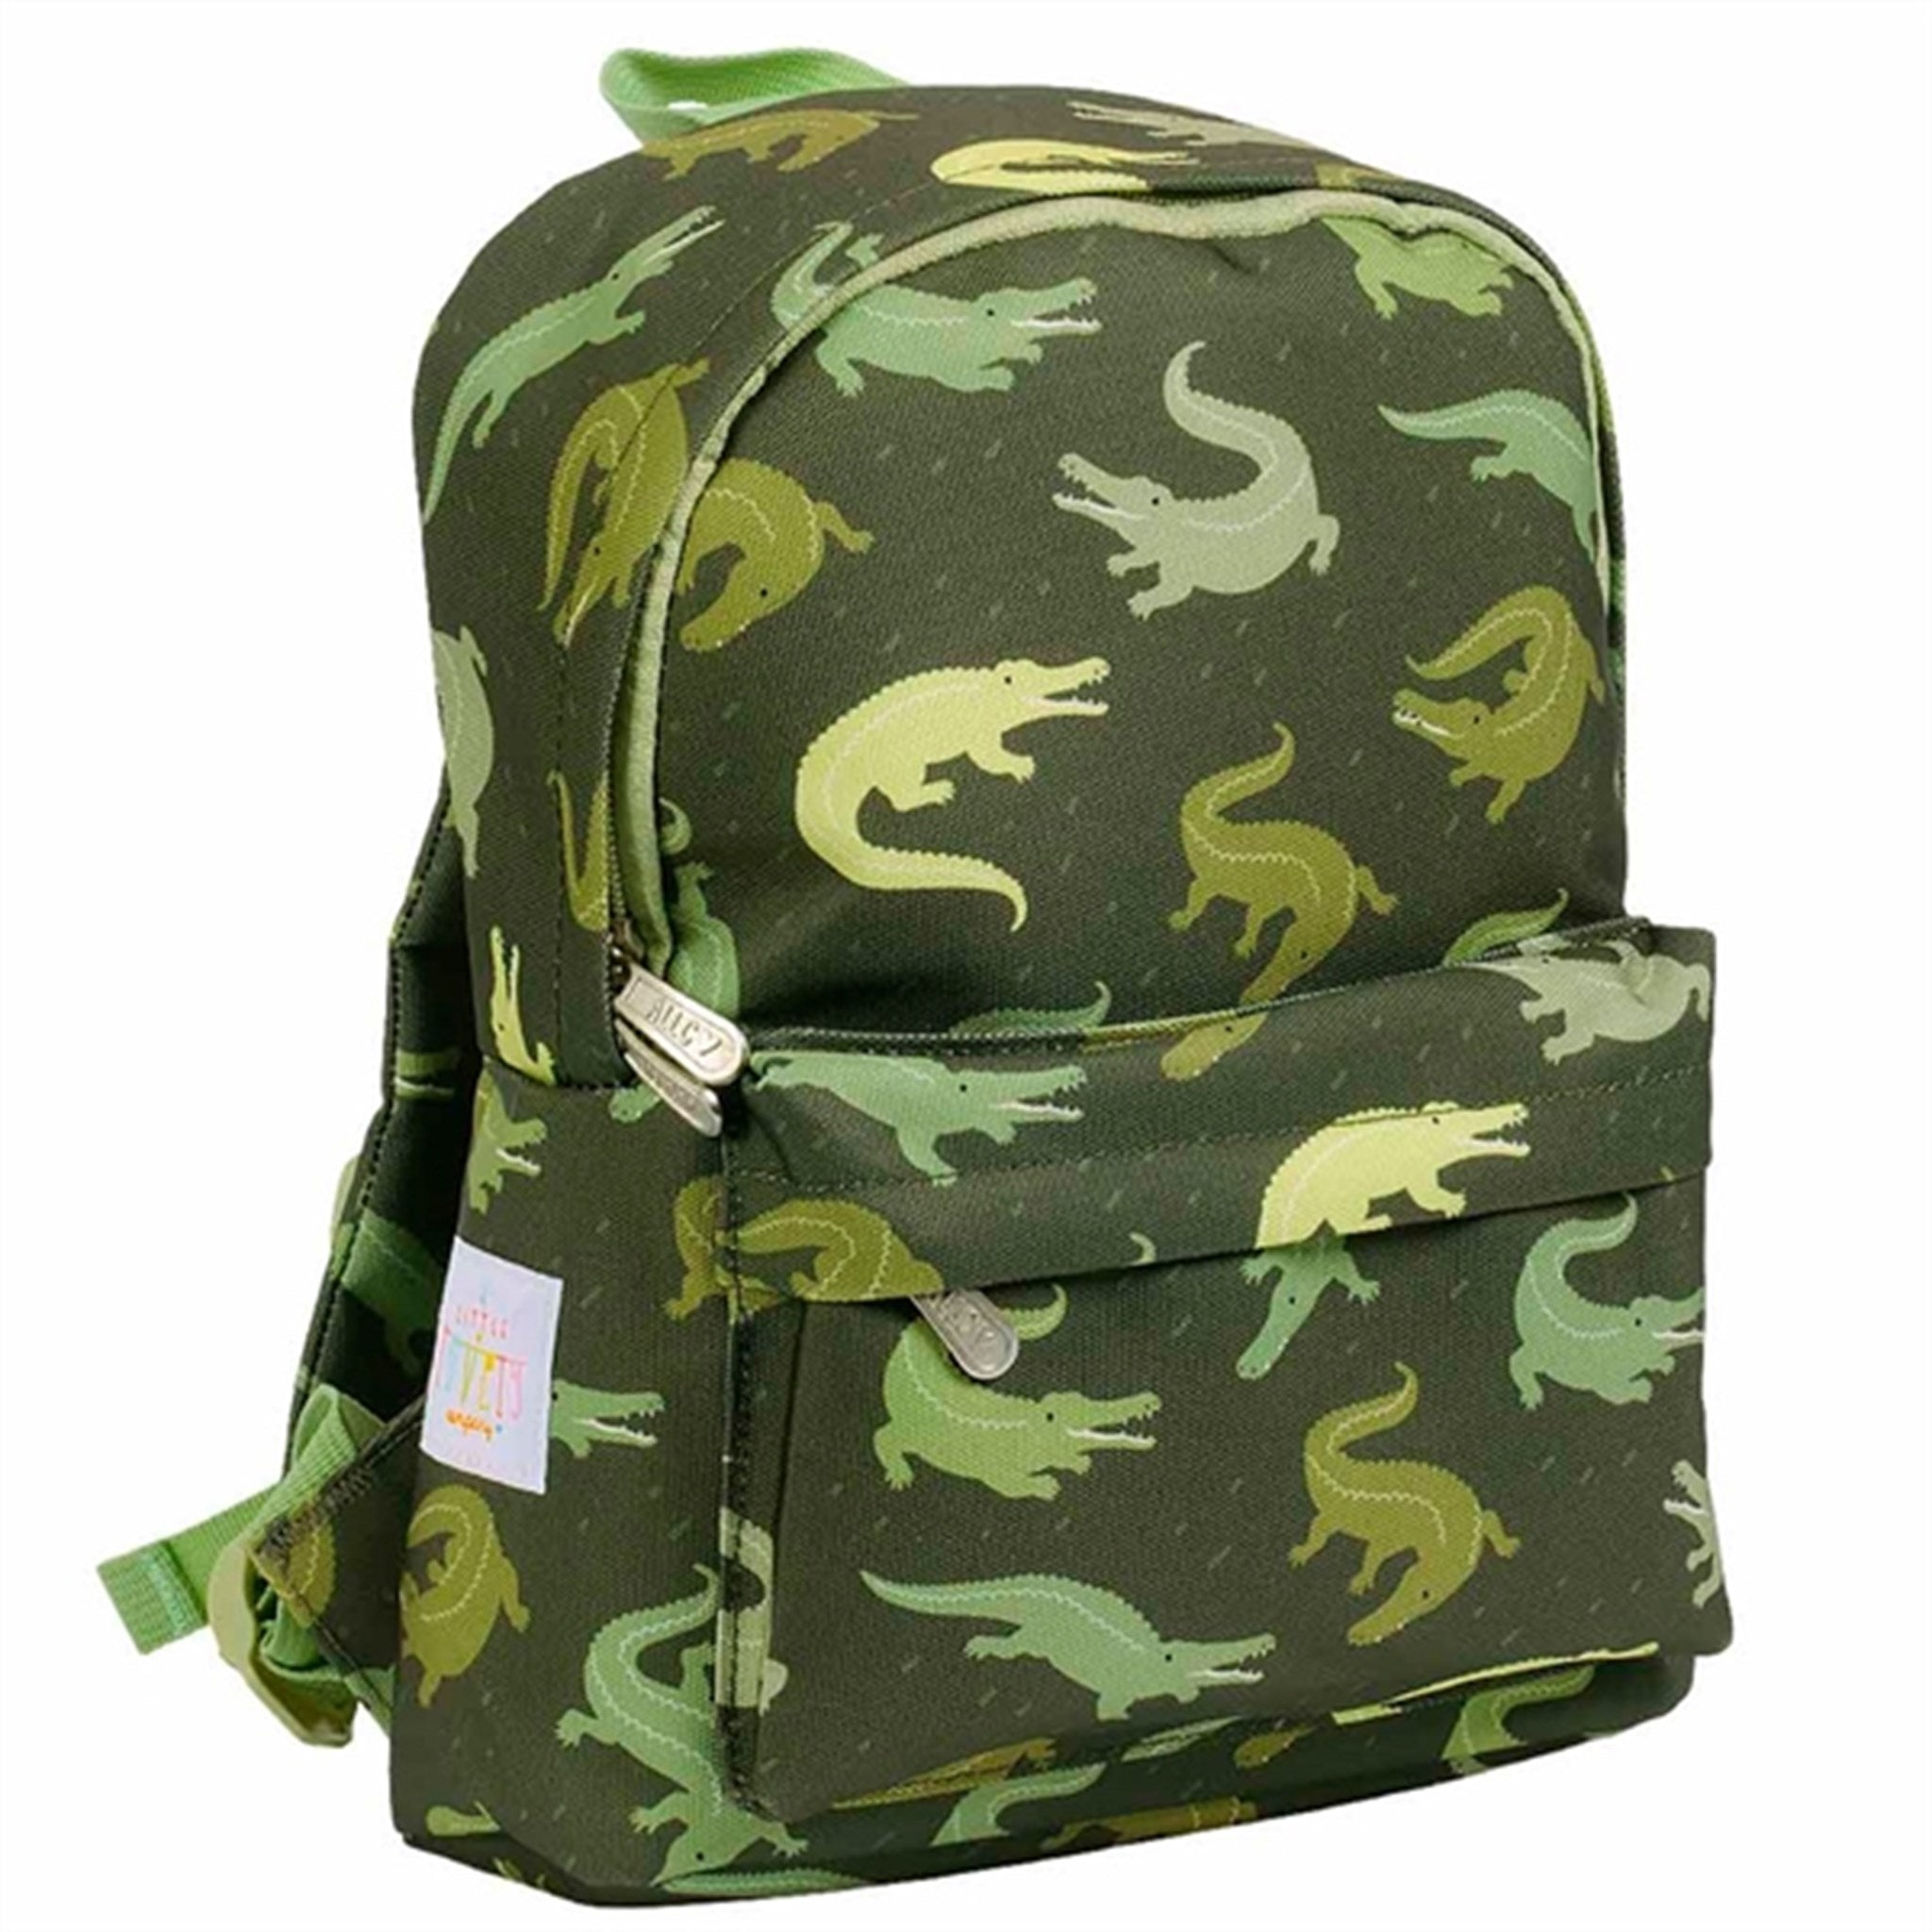 A Little Lovely Company Backpack Small Crocodiles 7